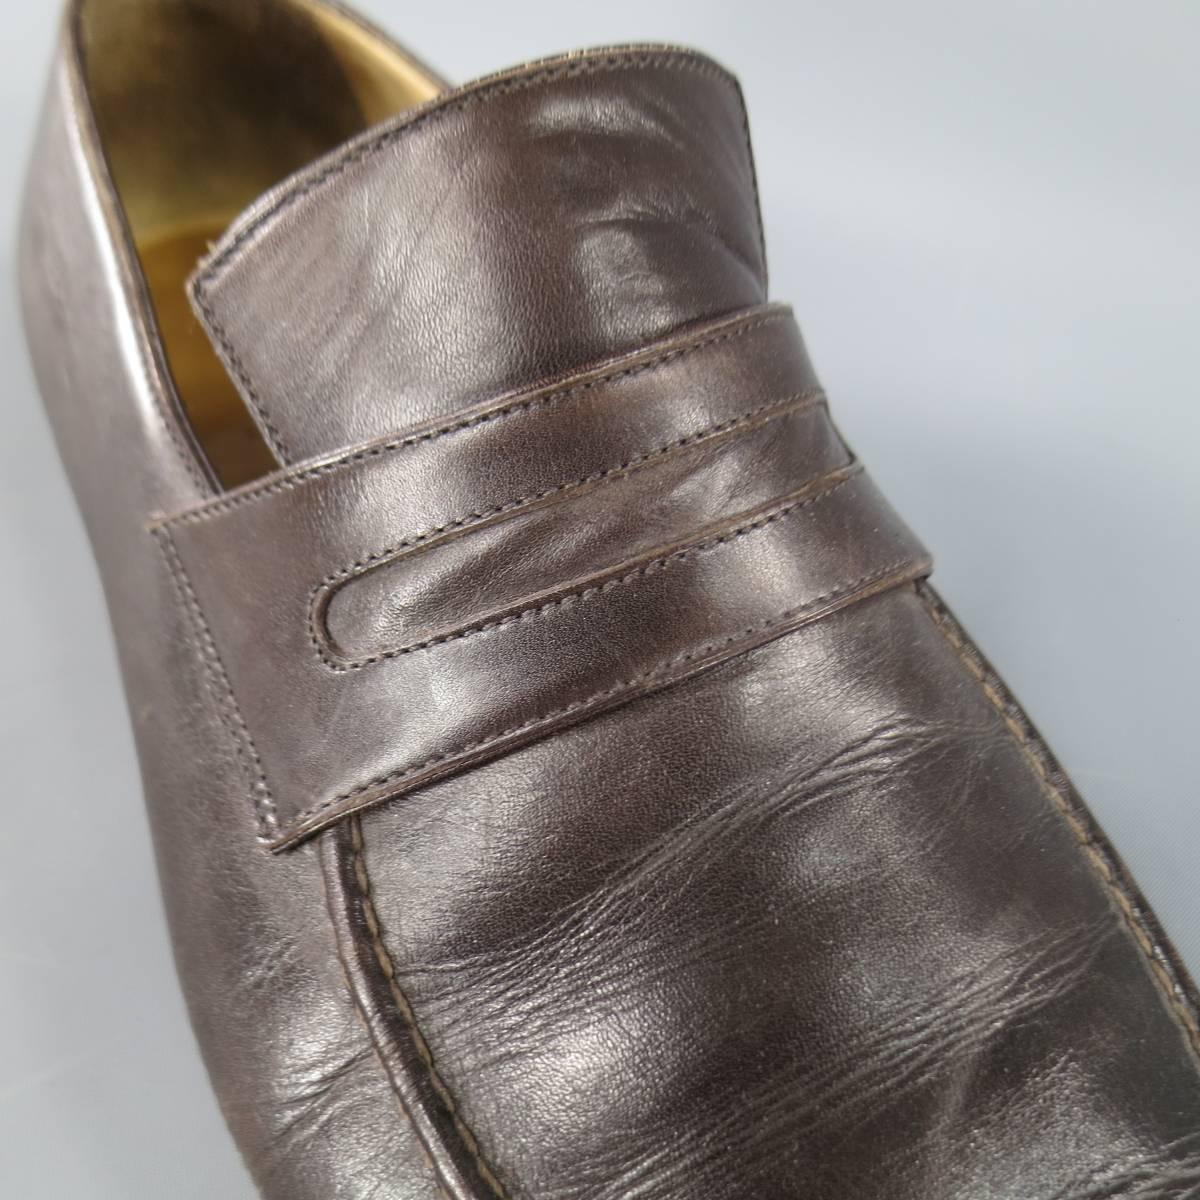 BRIONI Size 11 Brown Leather Top Stitching Penny Loafers 1